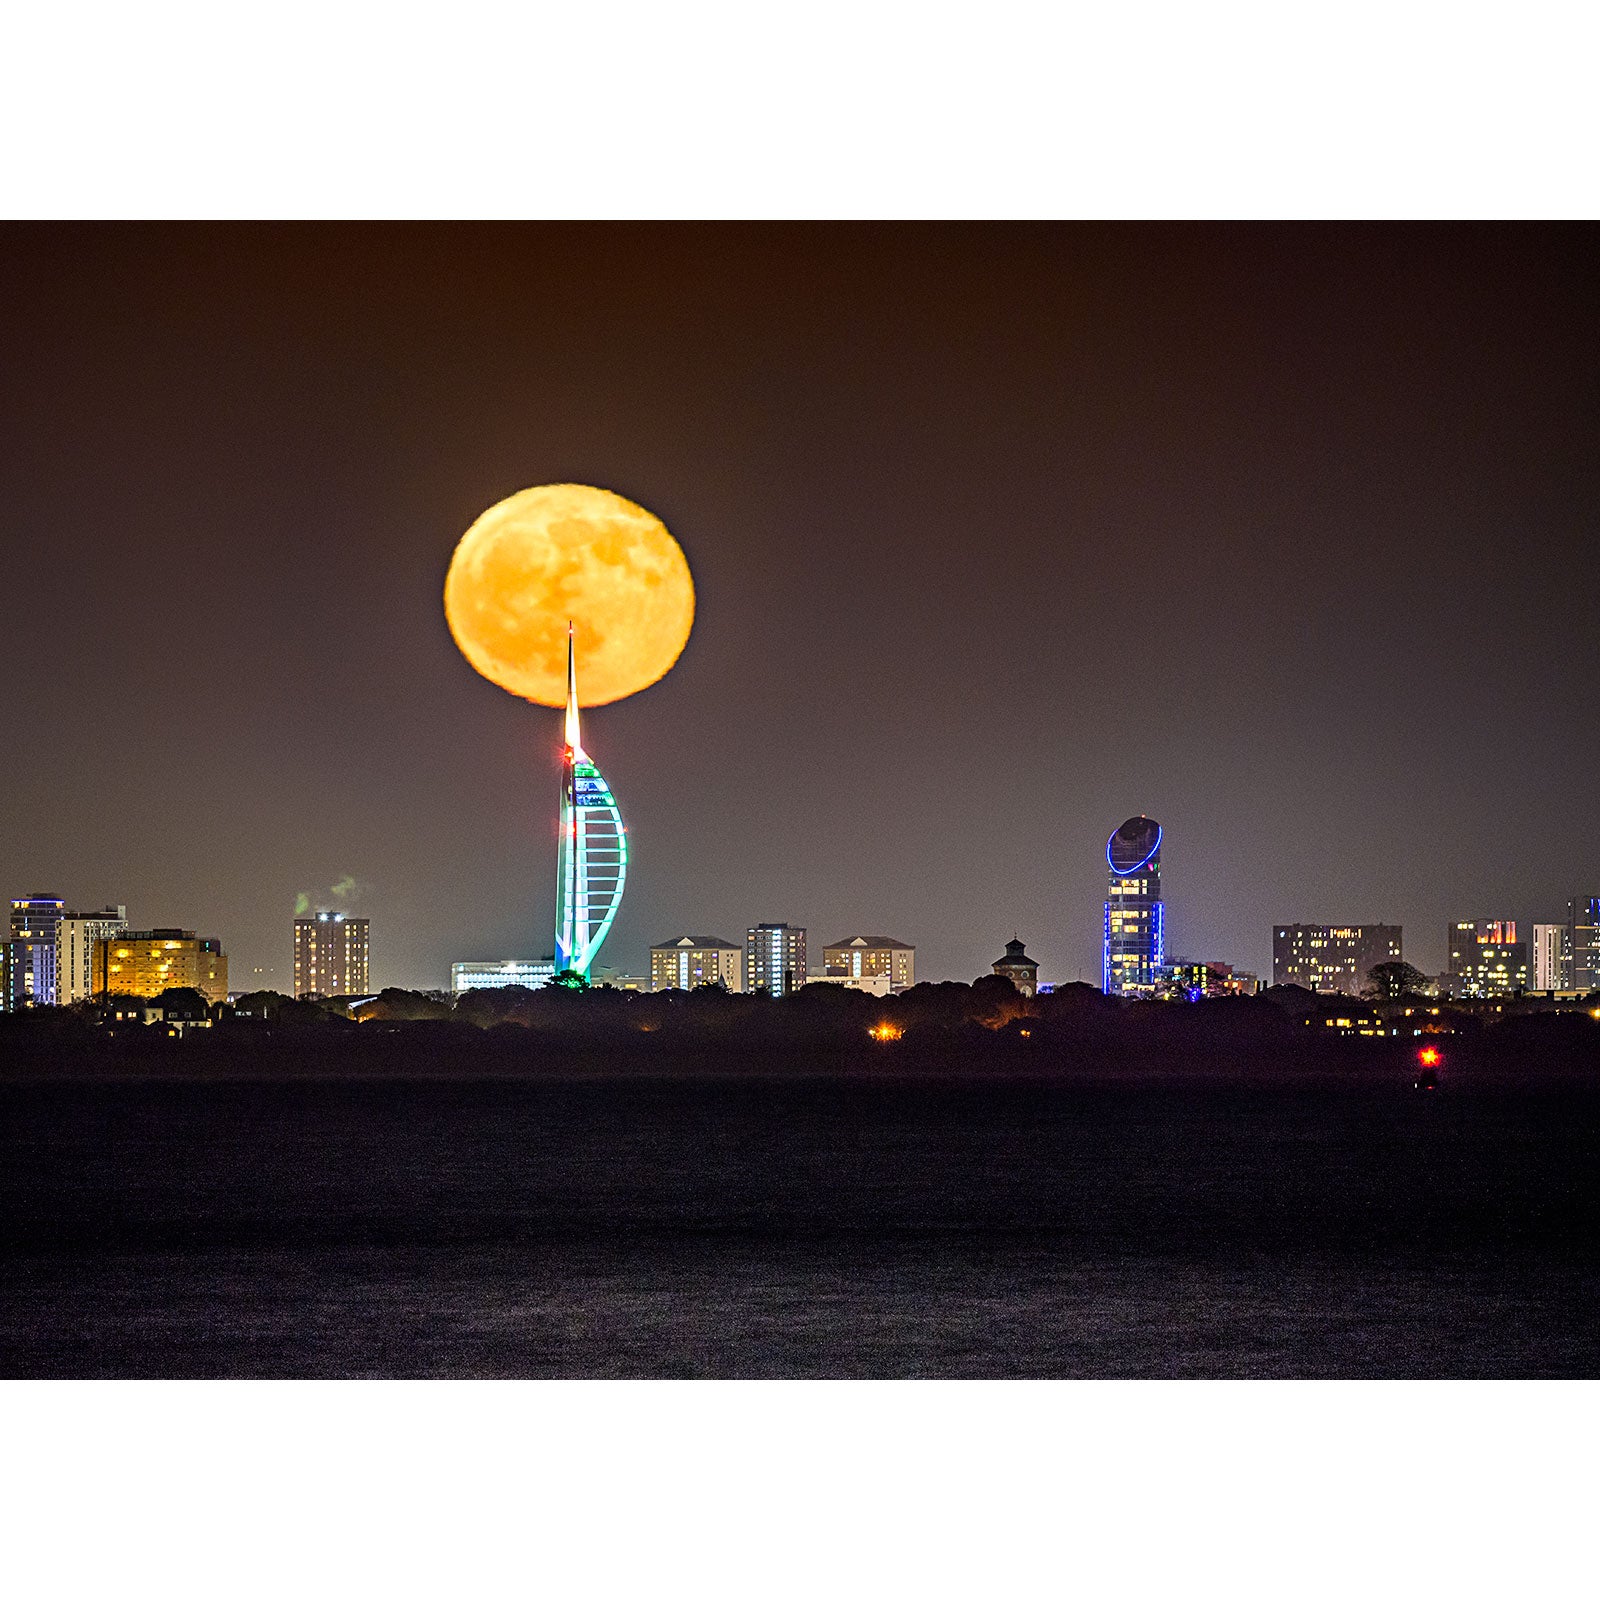 A Moonrise rising behind a city skyline with an illuminated tower on Gascoigne Isle, captured by Available Light Photography.